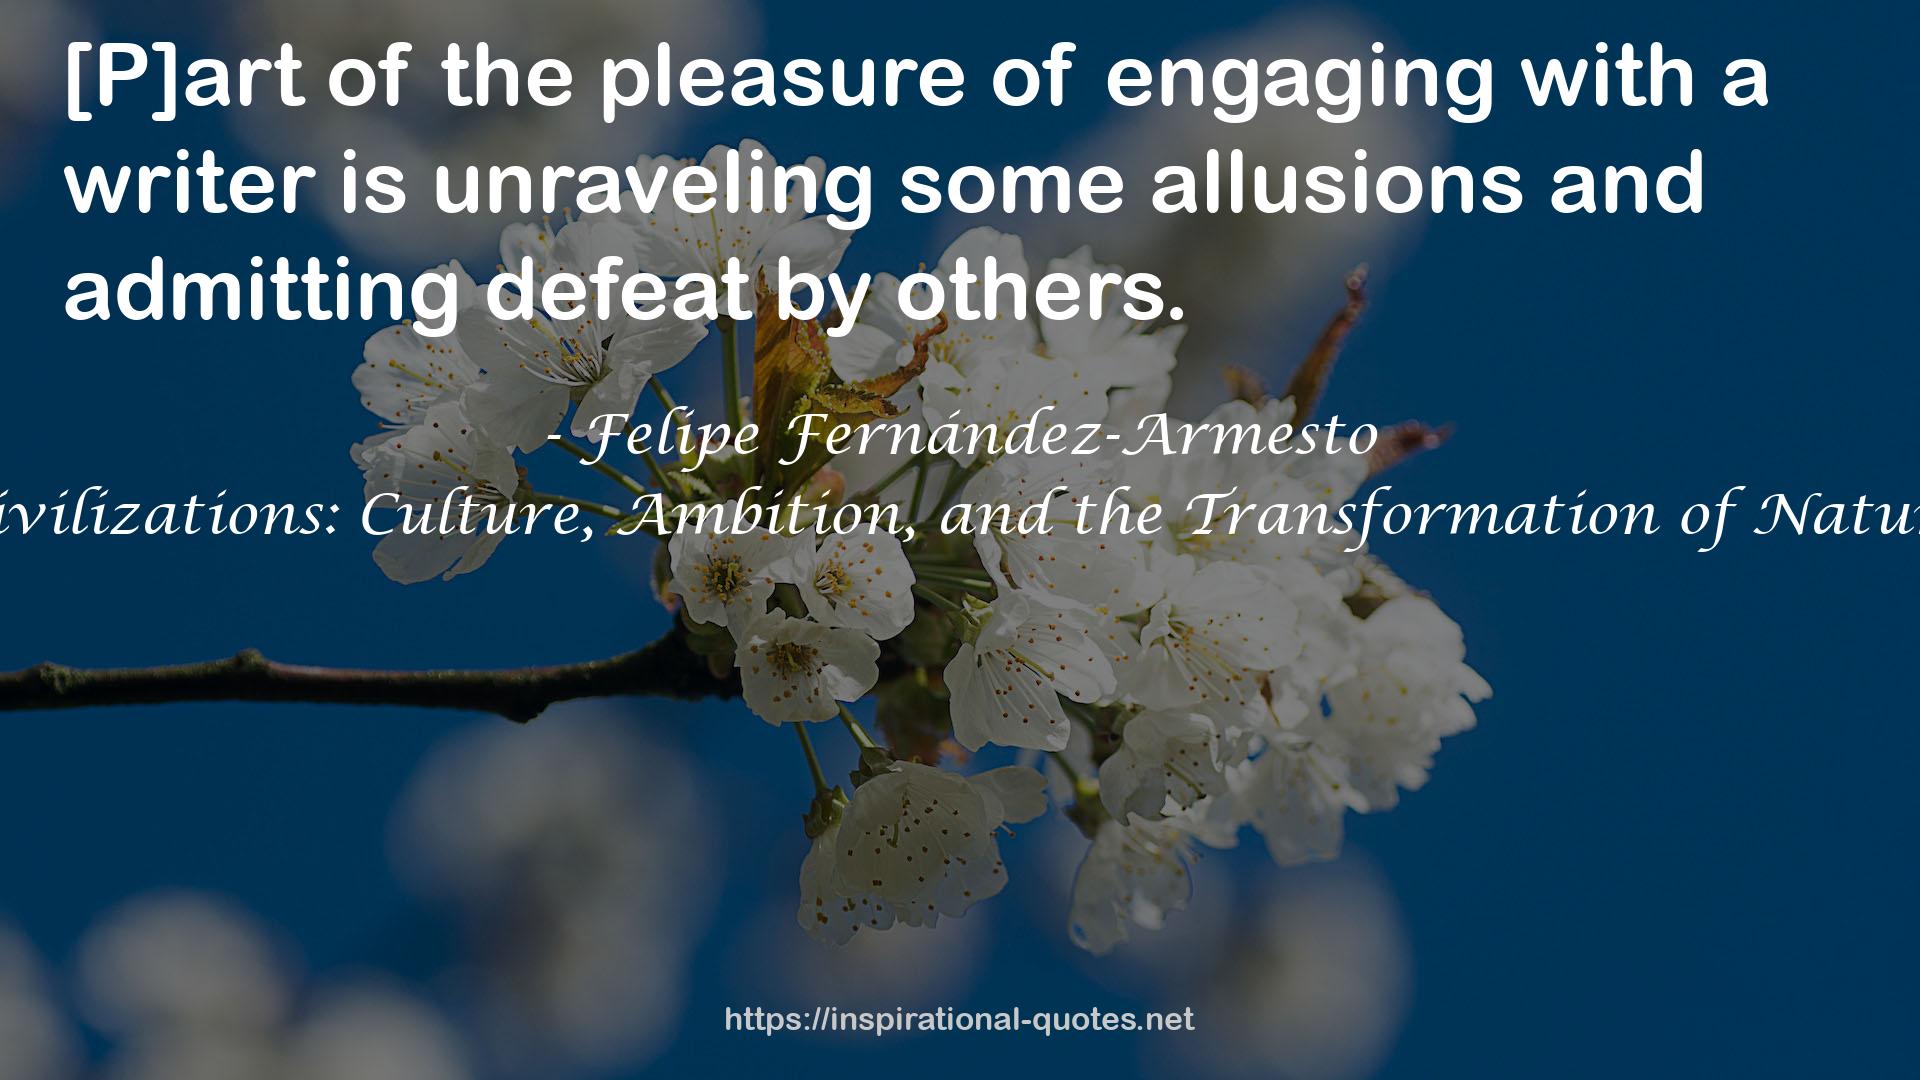 Civilizations: Culture, Ambition, and the Transformation of Nature QUOTES